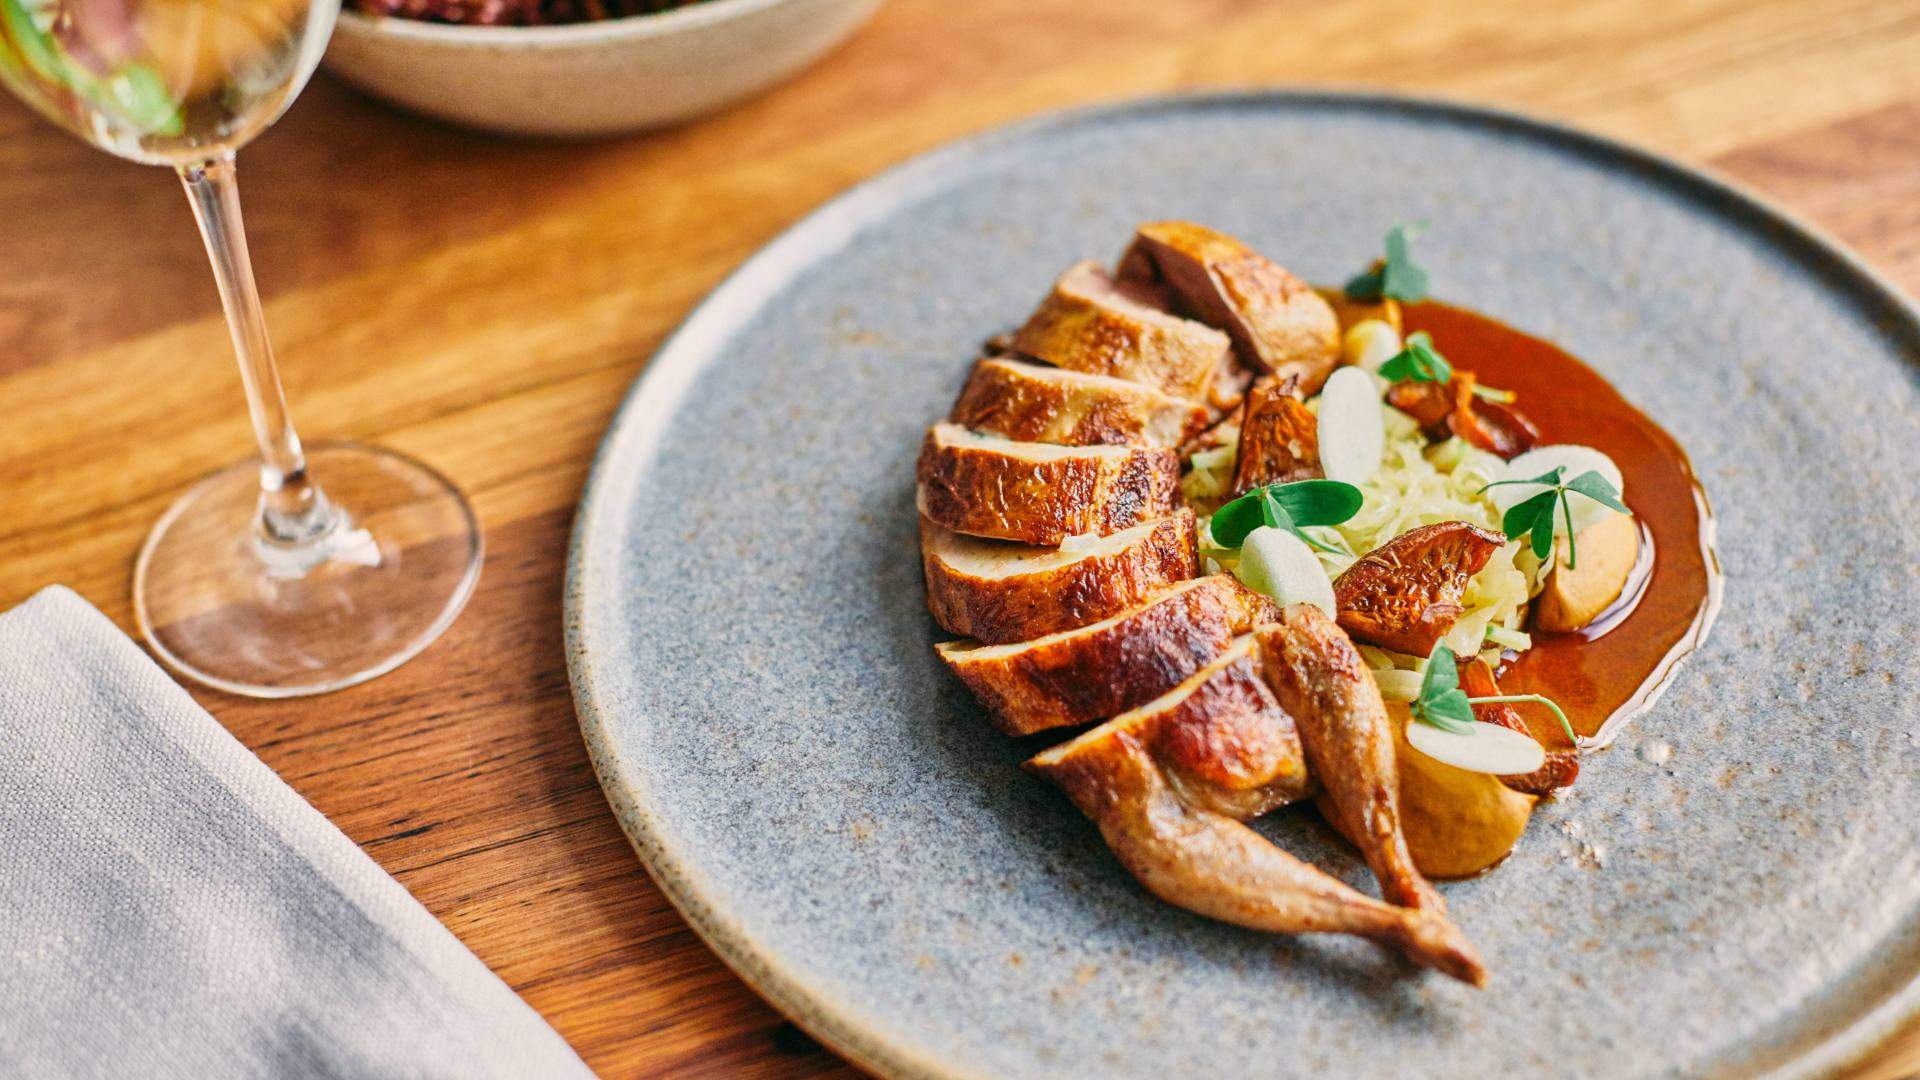 Omnia Is South Yarra's New Pop-Up Bar and Restaurant by an Award-Winning Chef